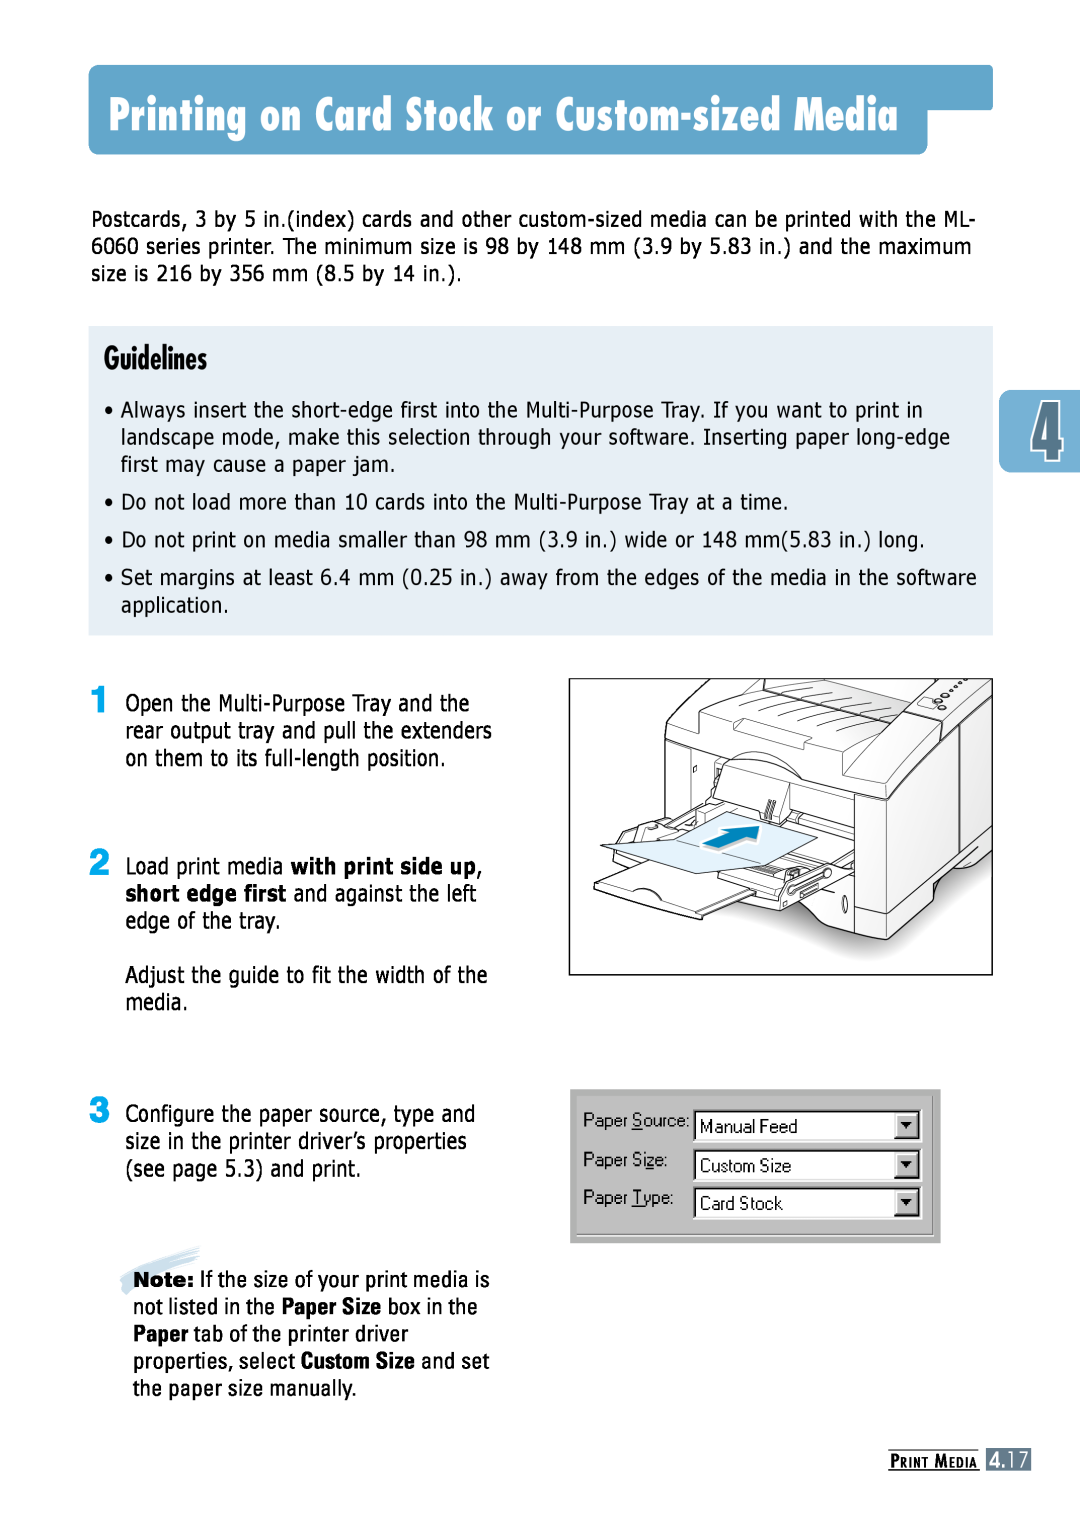 Samsung ML-6060 Printing on Card Stock or Custom-sized Media, Guidelines, Adjust the guide to fit the width of the media 